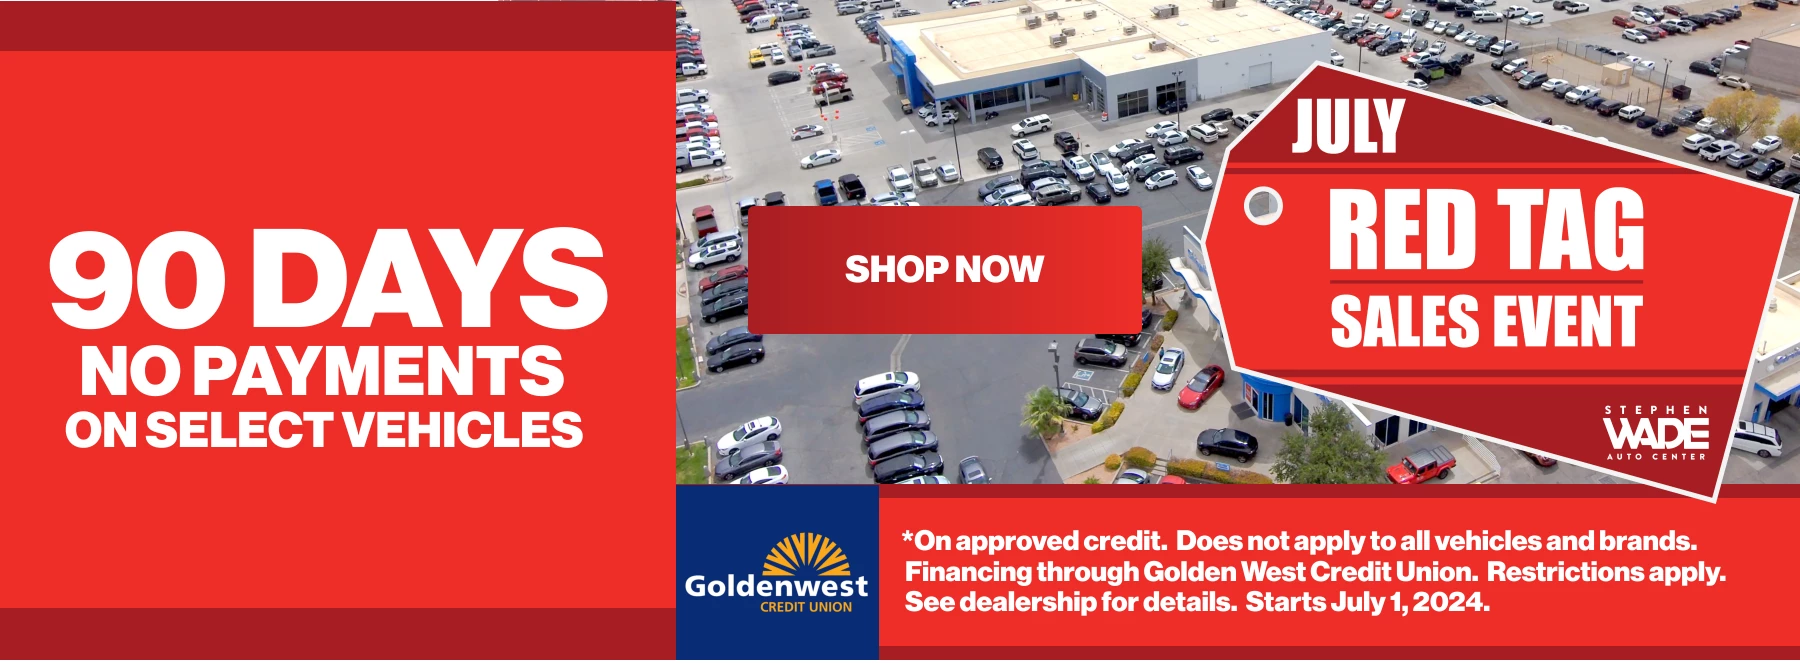 Banner of Red Tag Sales Event at Stephen Wade in St. George, UT